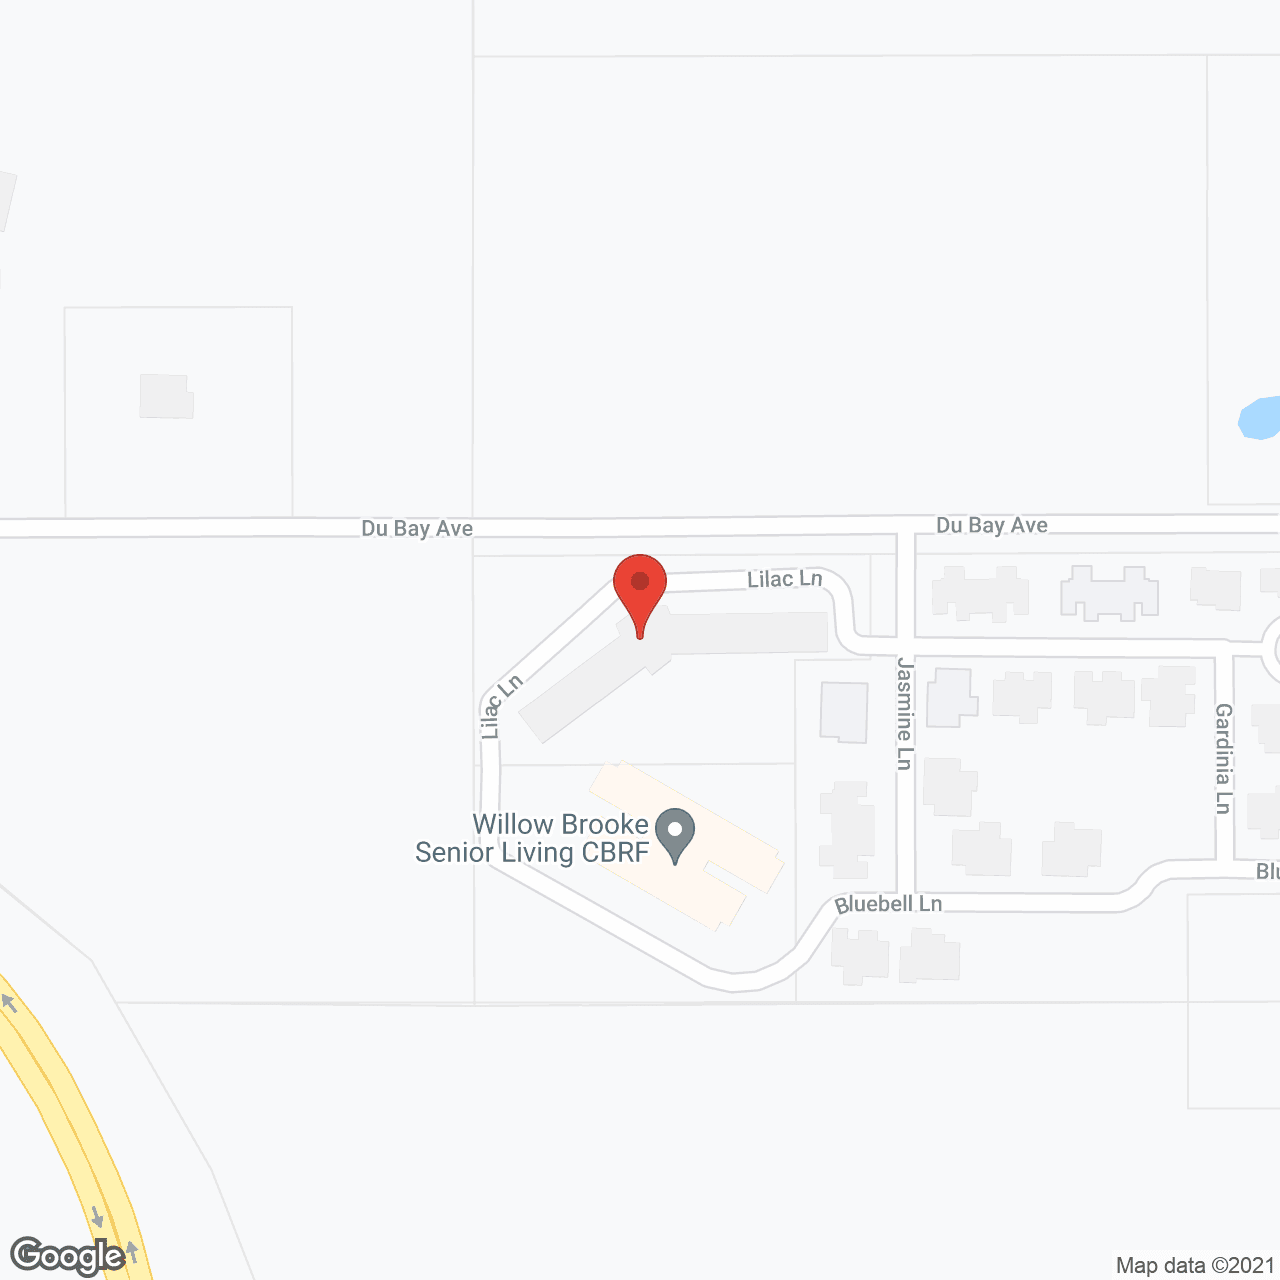 Willow Brooke Senior Living RCAC in google map